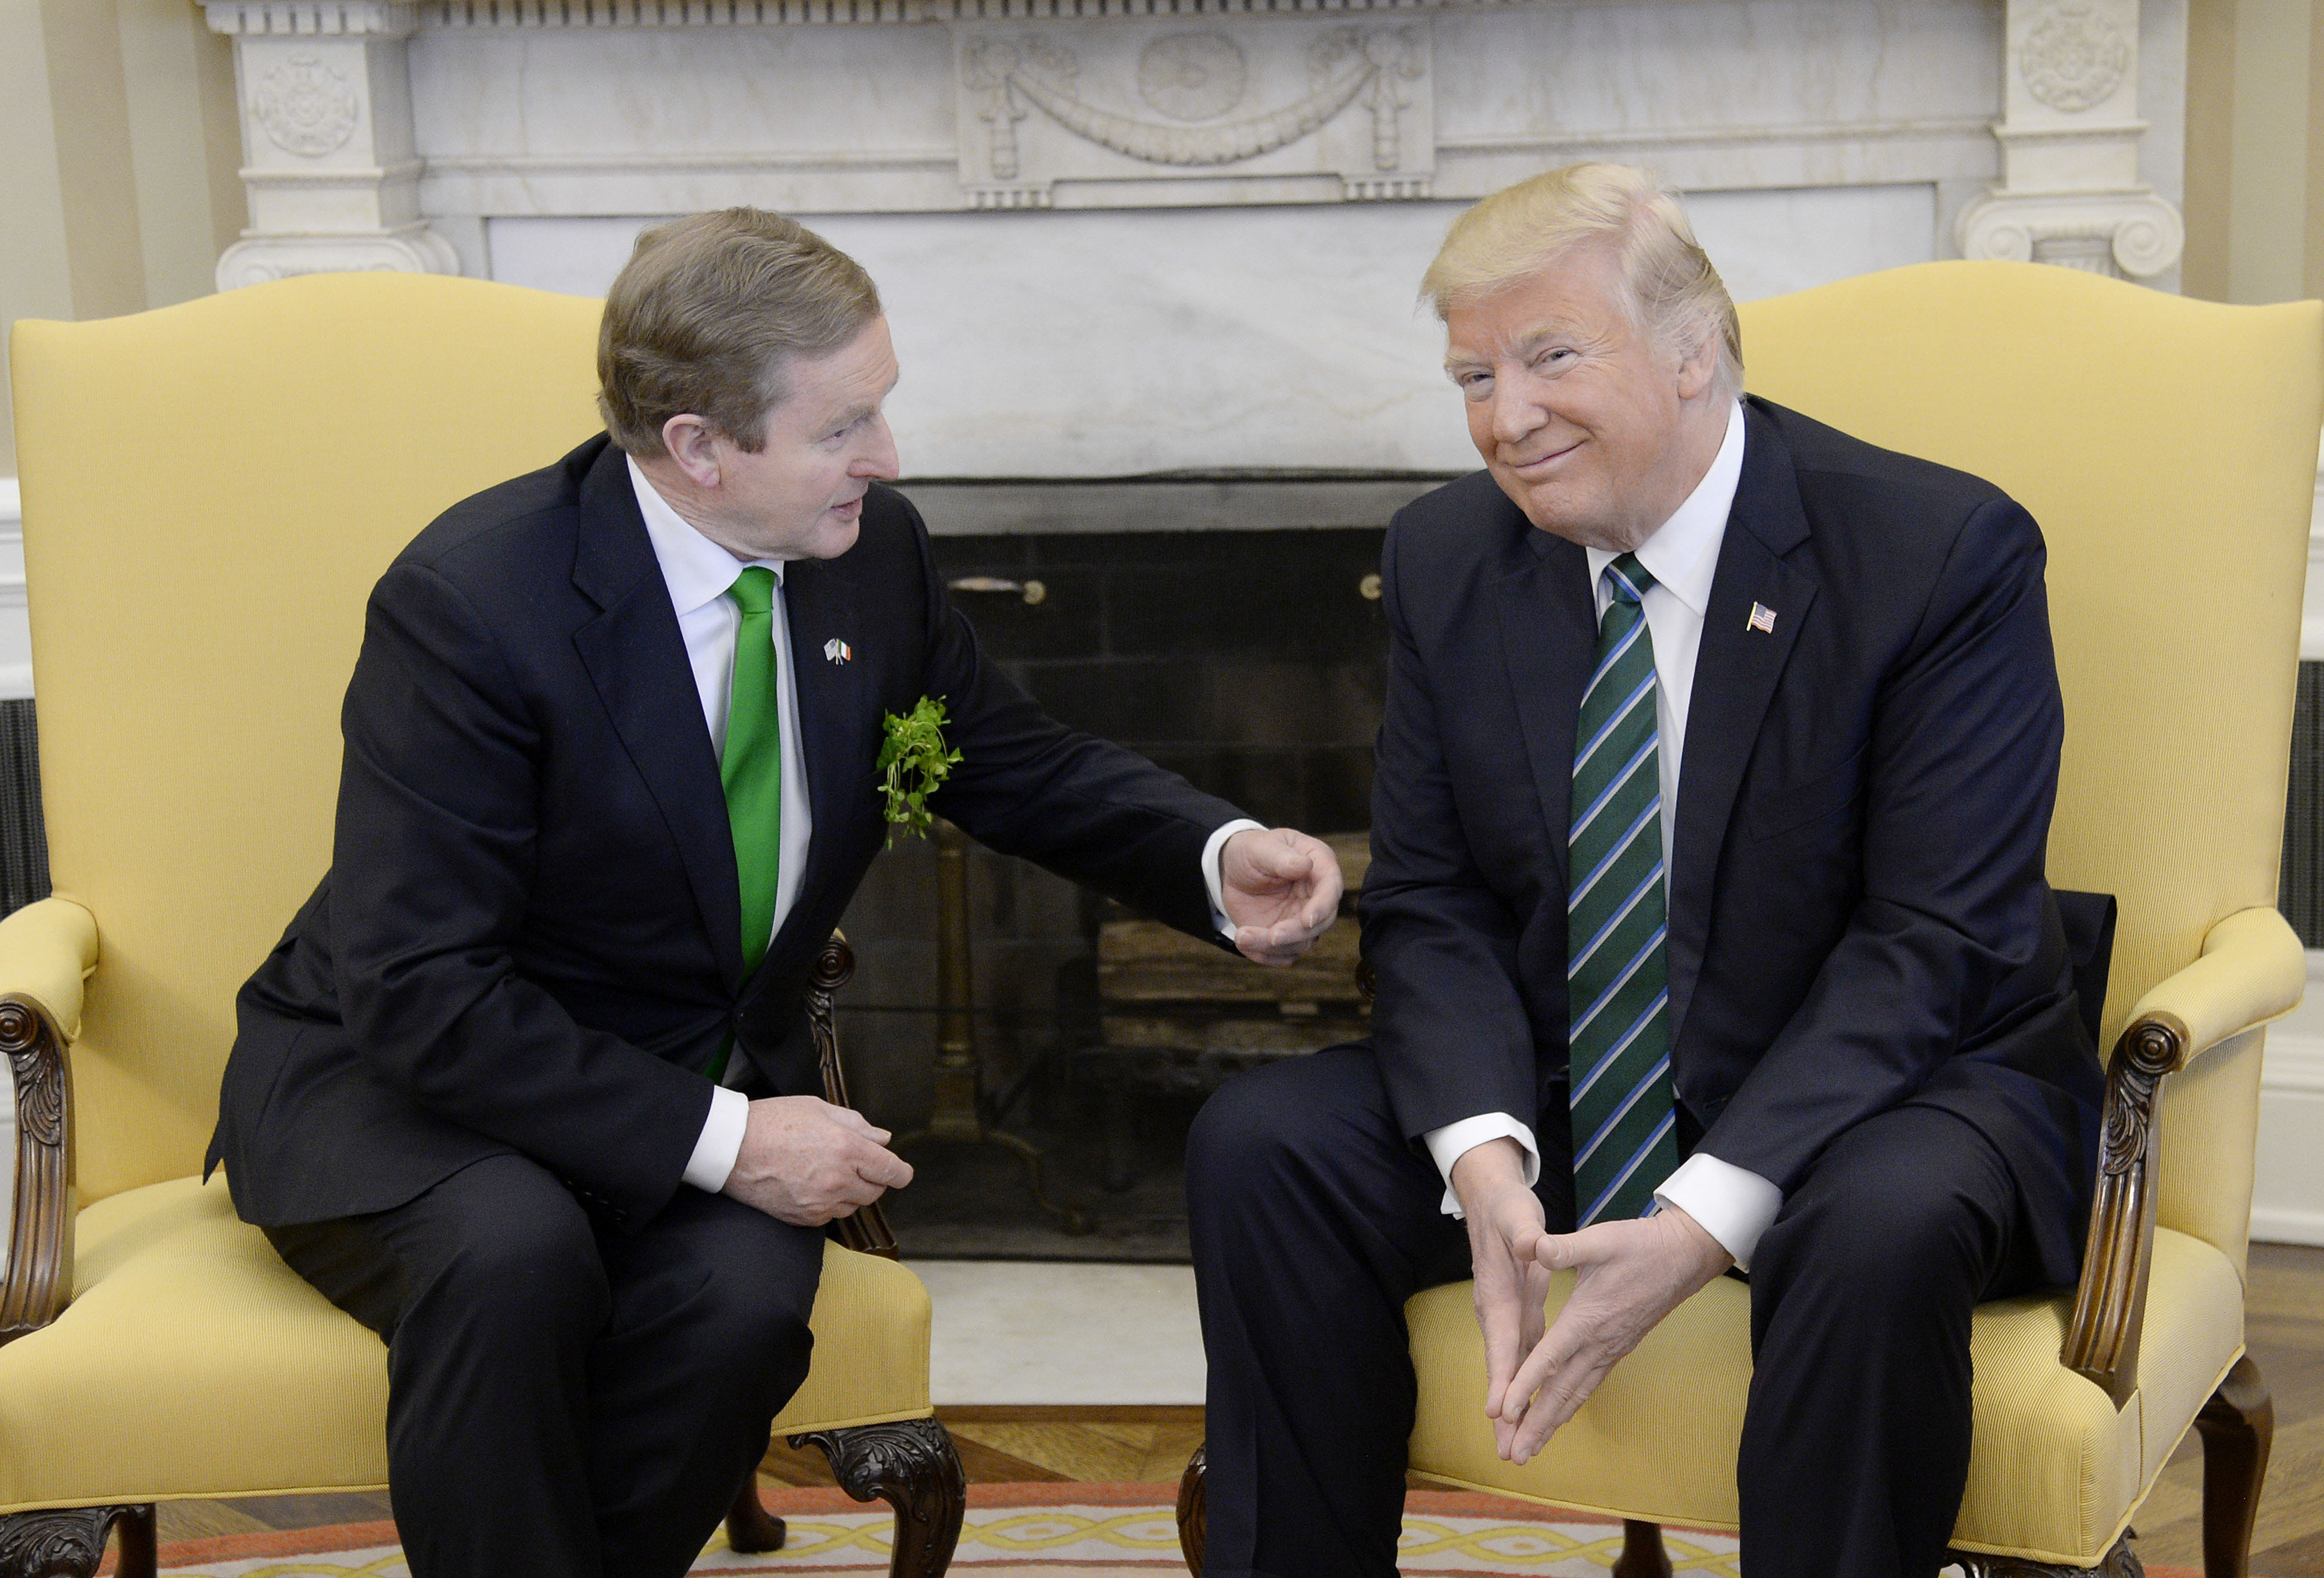 President Donald Trump meets with Ireland's Taoiseach Enda Kenny in the Oval Office. 